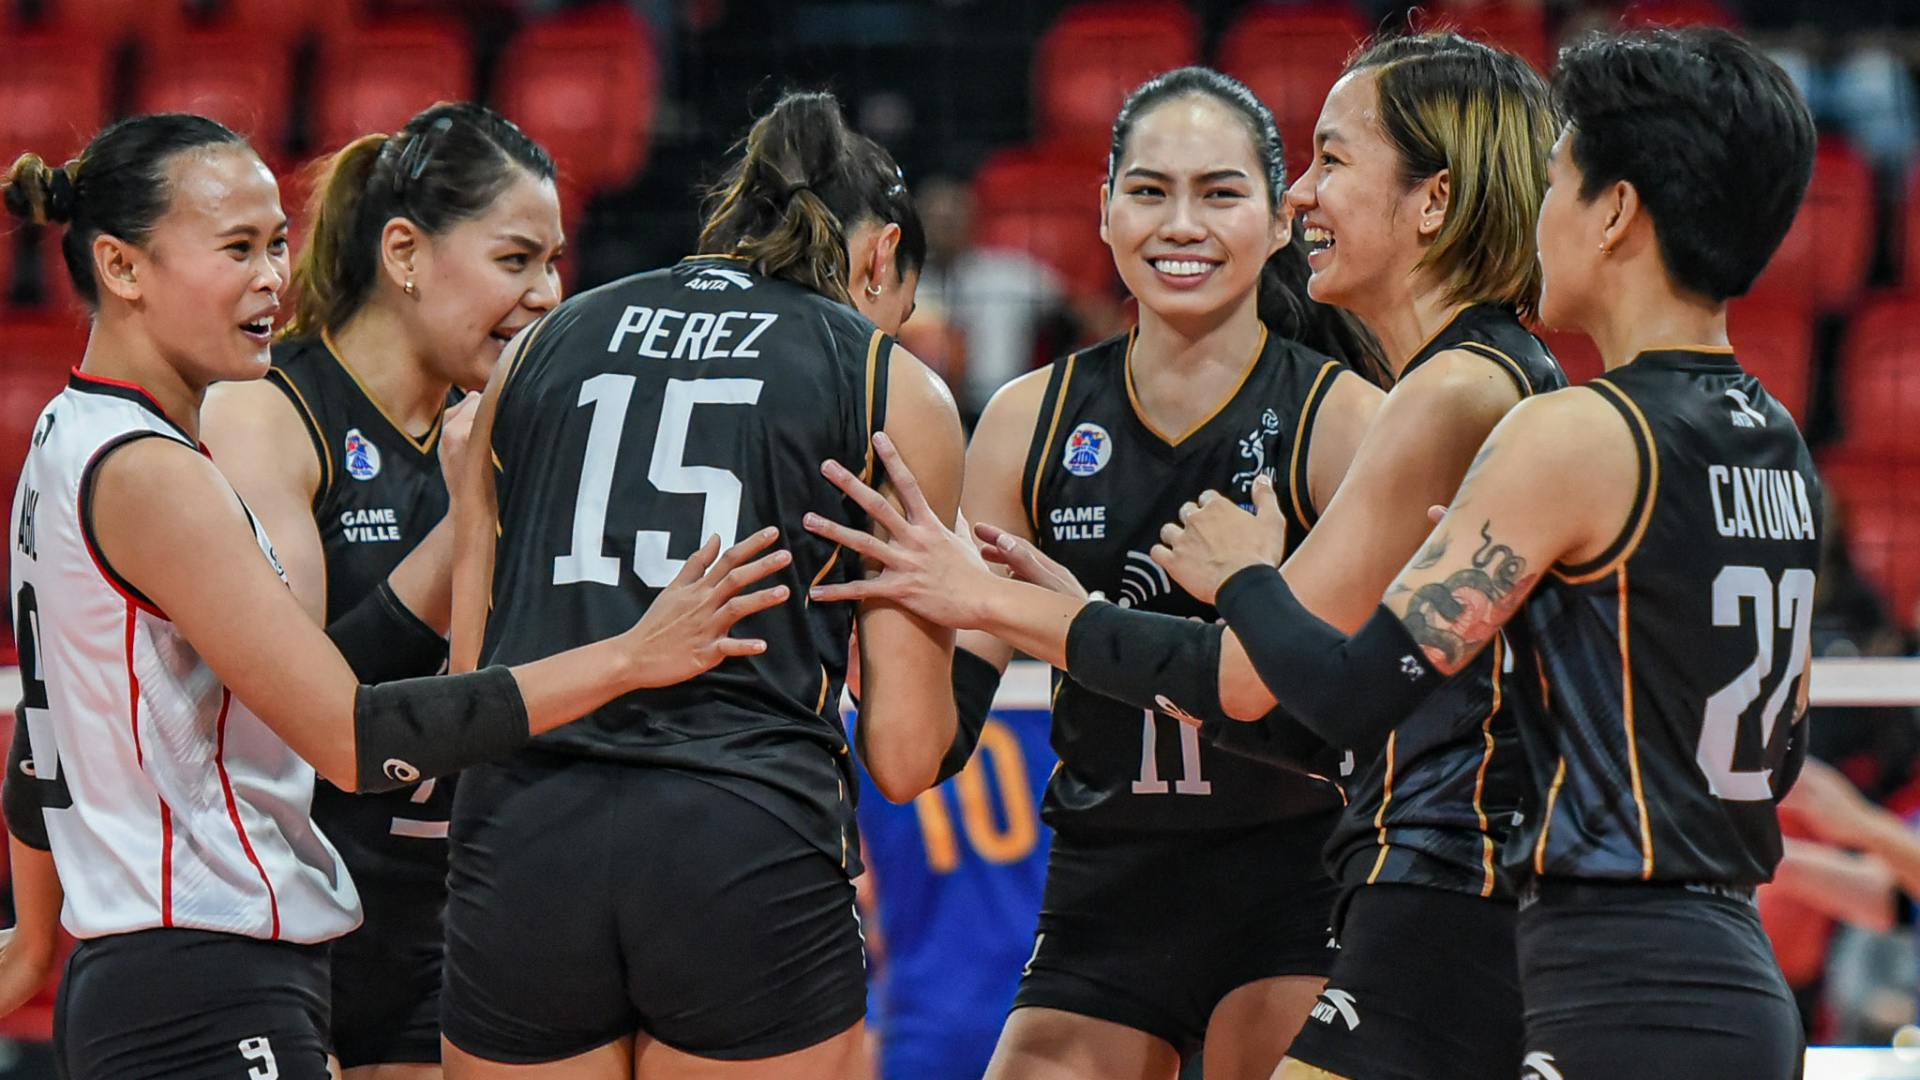 PVL: Cignal outshines upset-seeking Capital1 in Reinforced Conference